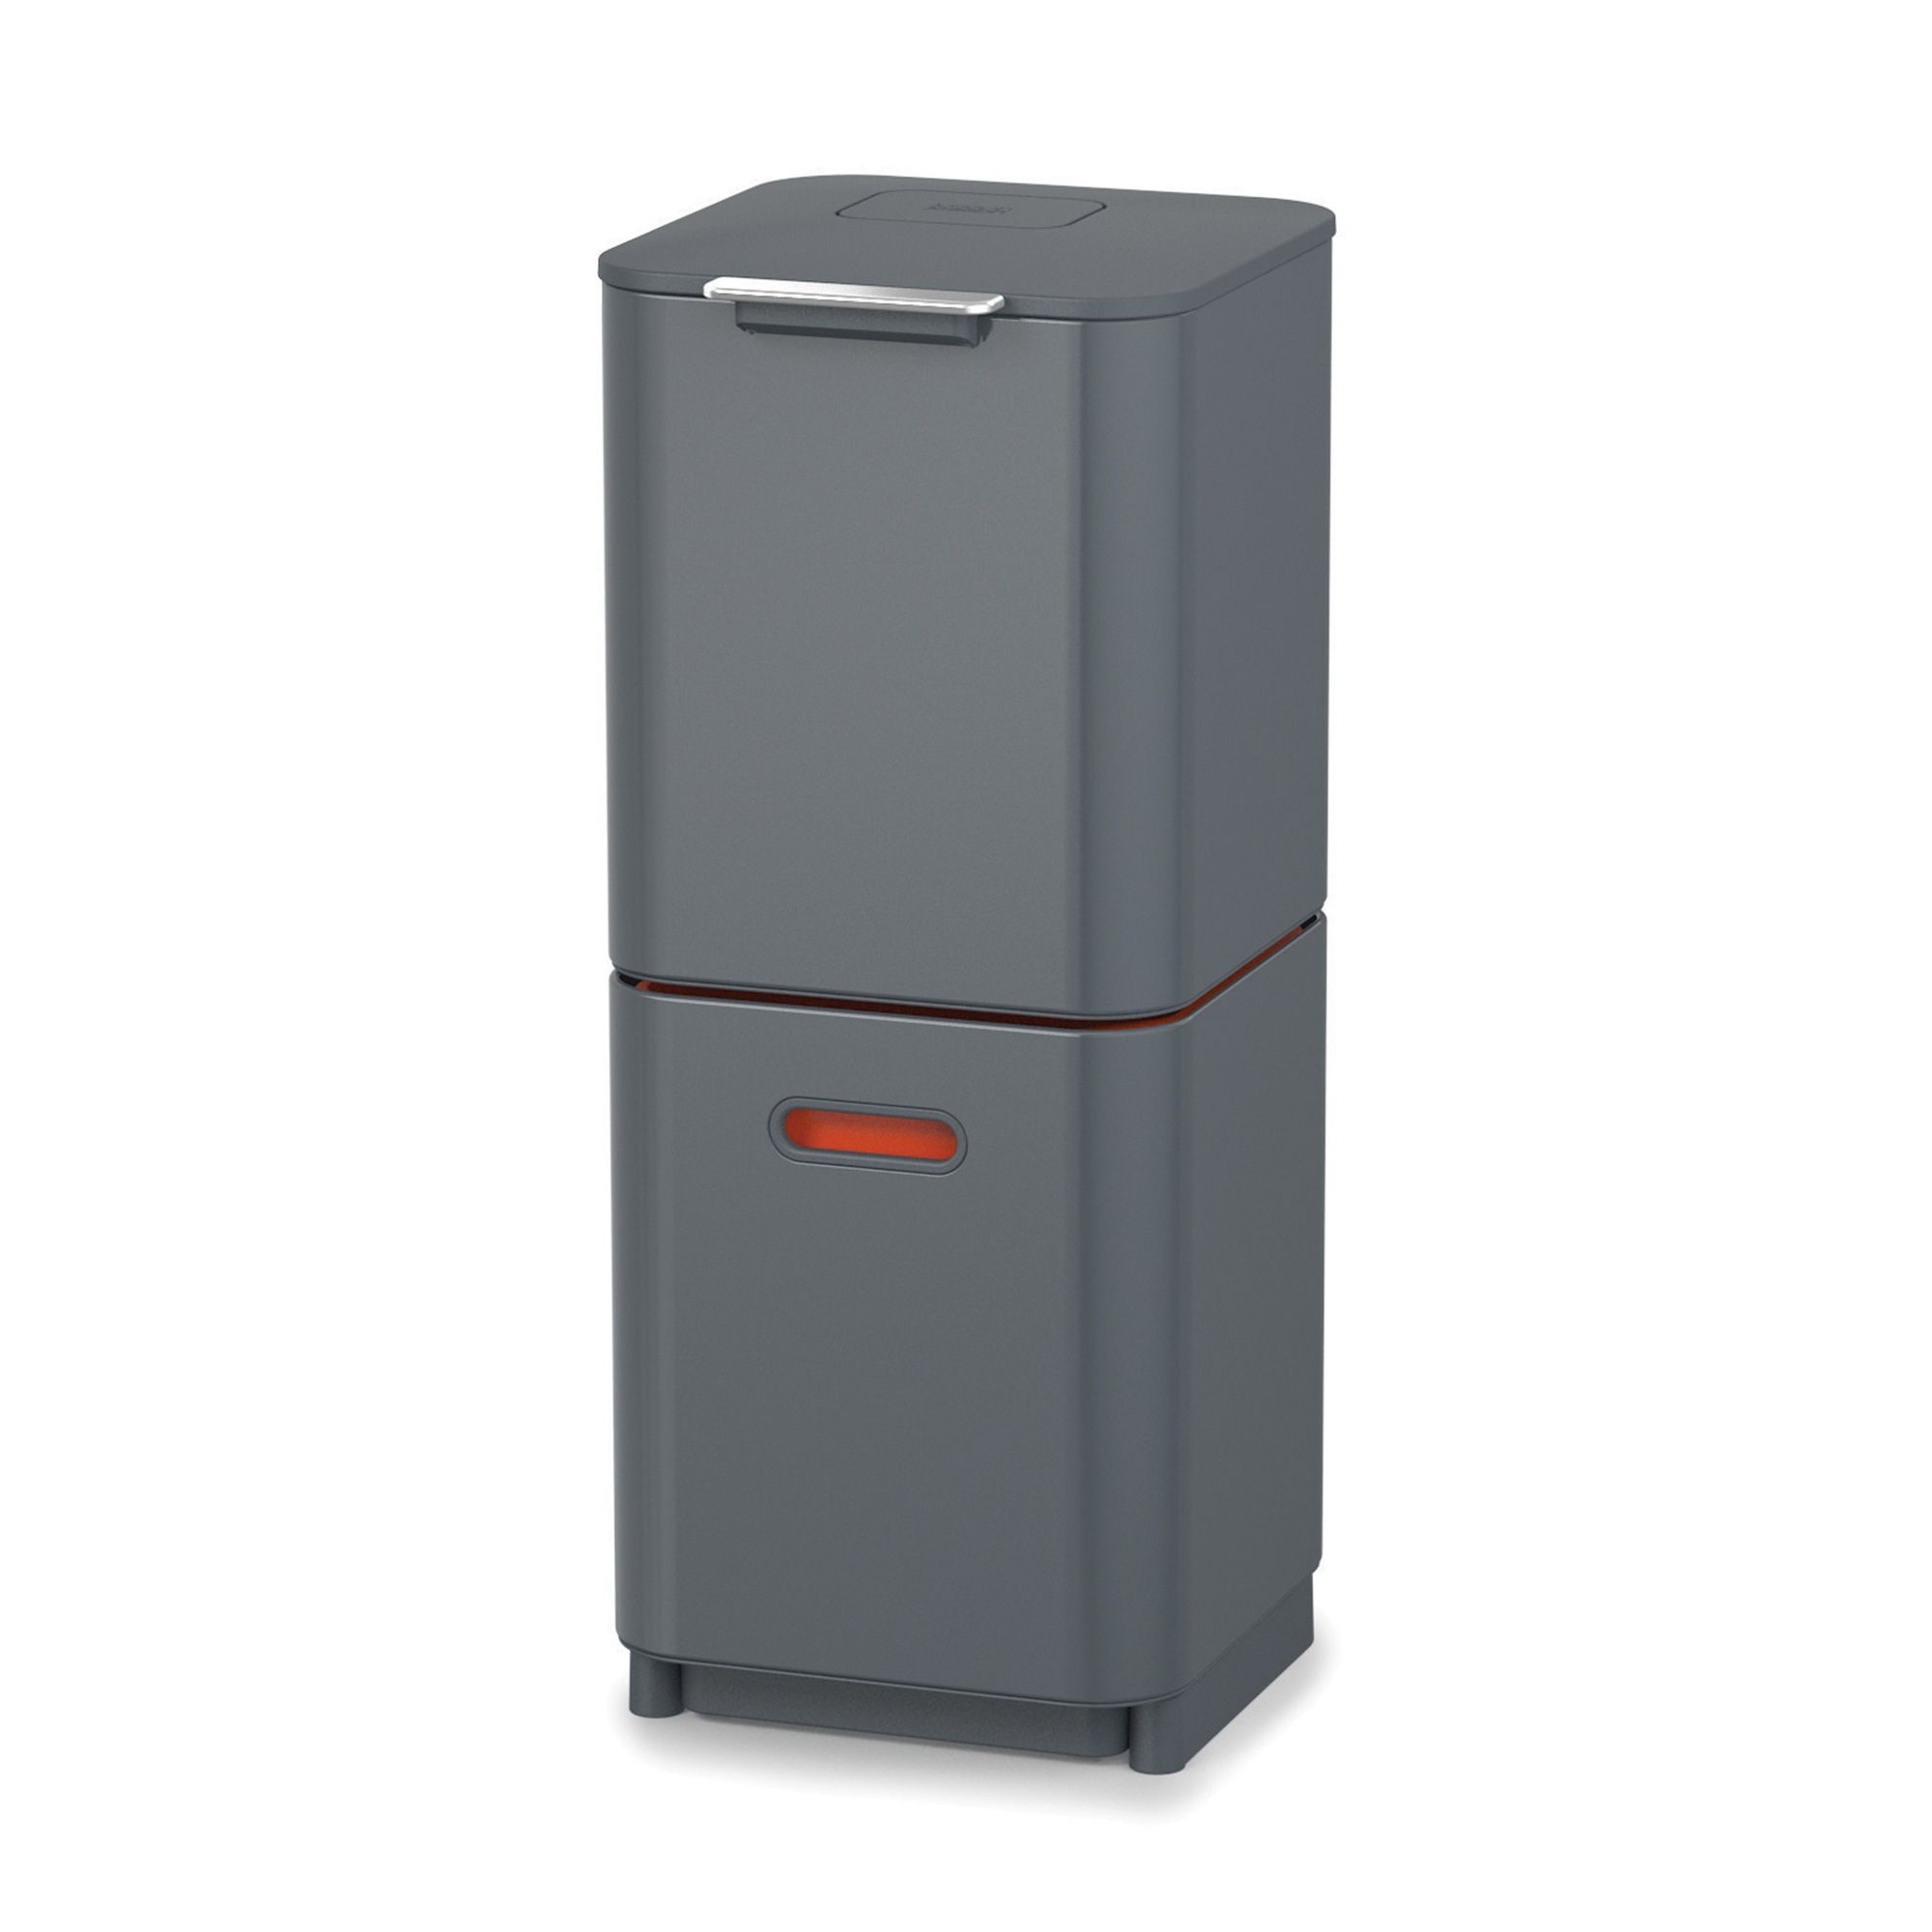 Joseph Joseph - Totem Compact waste separation and recycling bin